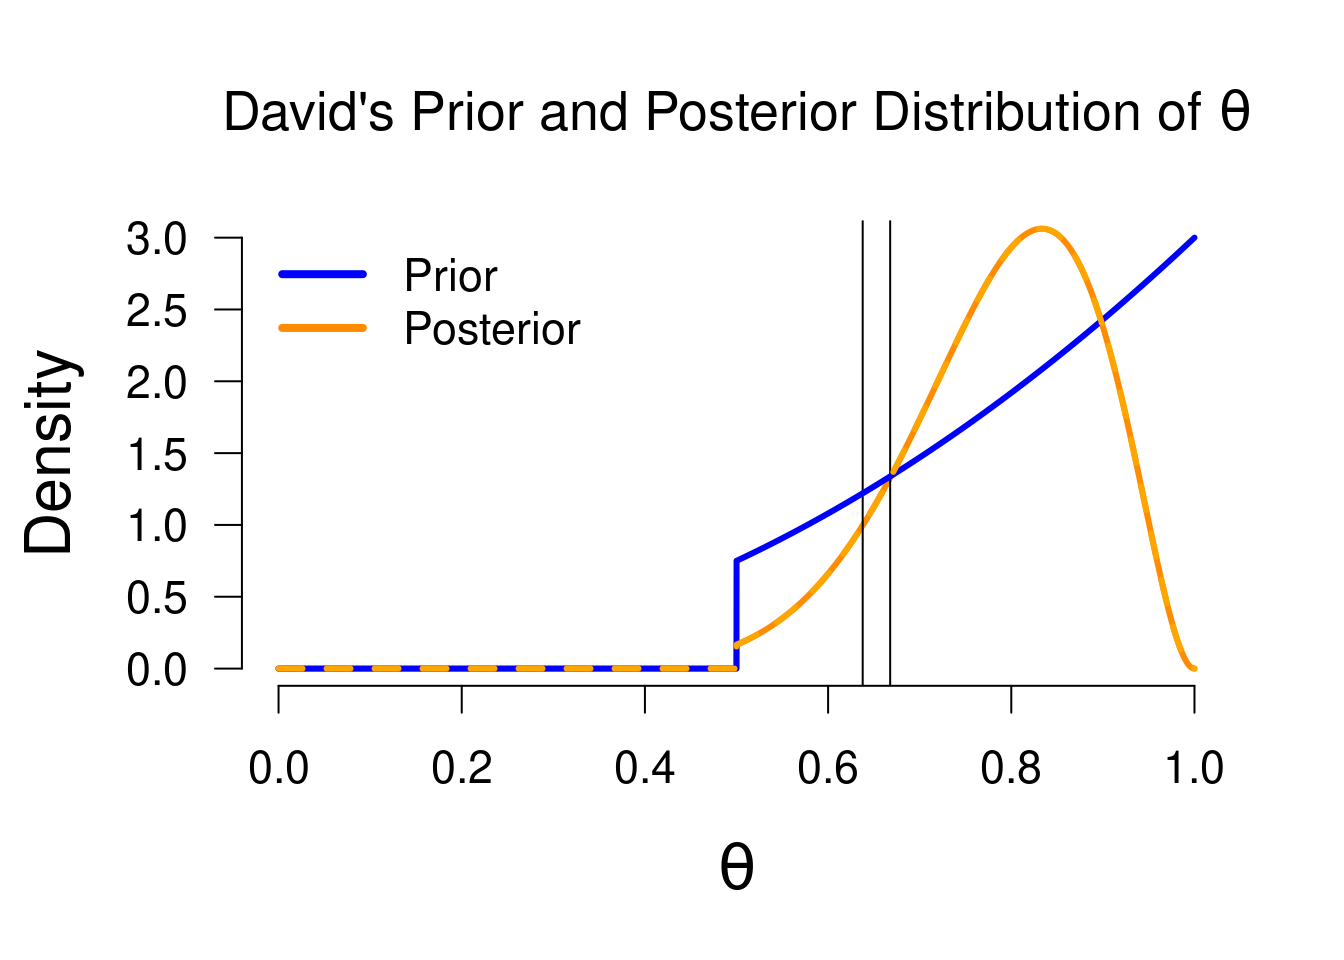 Prior and posterior distribution for David. Values that predicted the data better than average have received a boost in plausibility (i.e., posterior density > prior density), whie the reverse holds for values that predicted the data poorly.